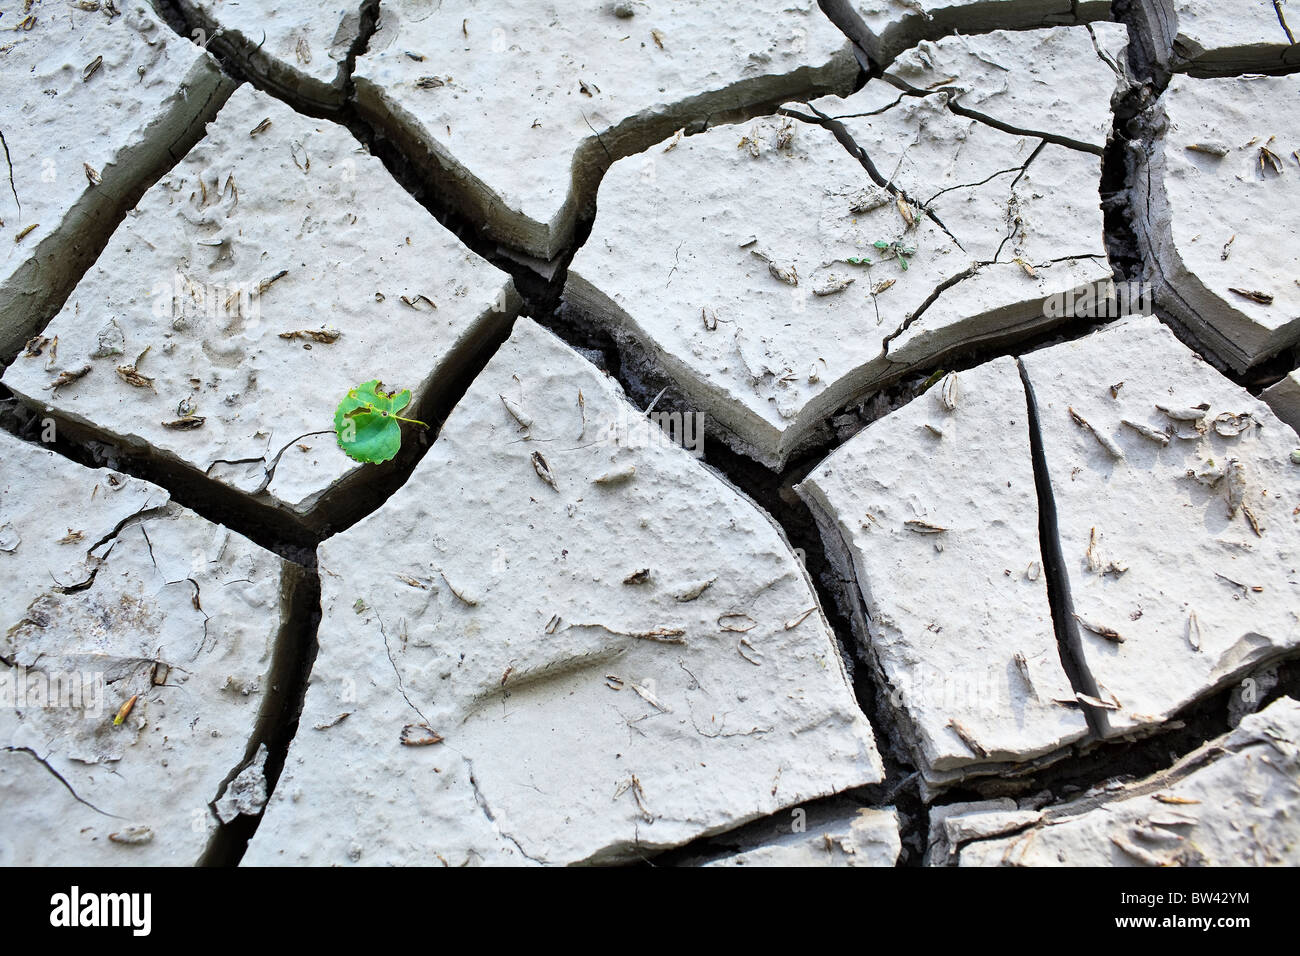 Cracked clay mud during a recent drought, Assiniboine River, Winnipeg, Manitoba, Canada Stock Photo